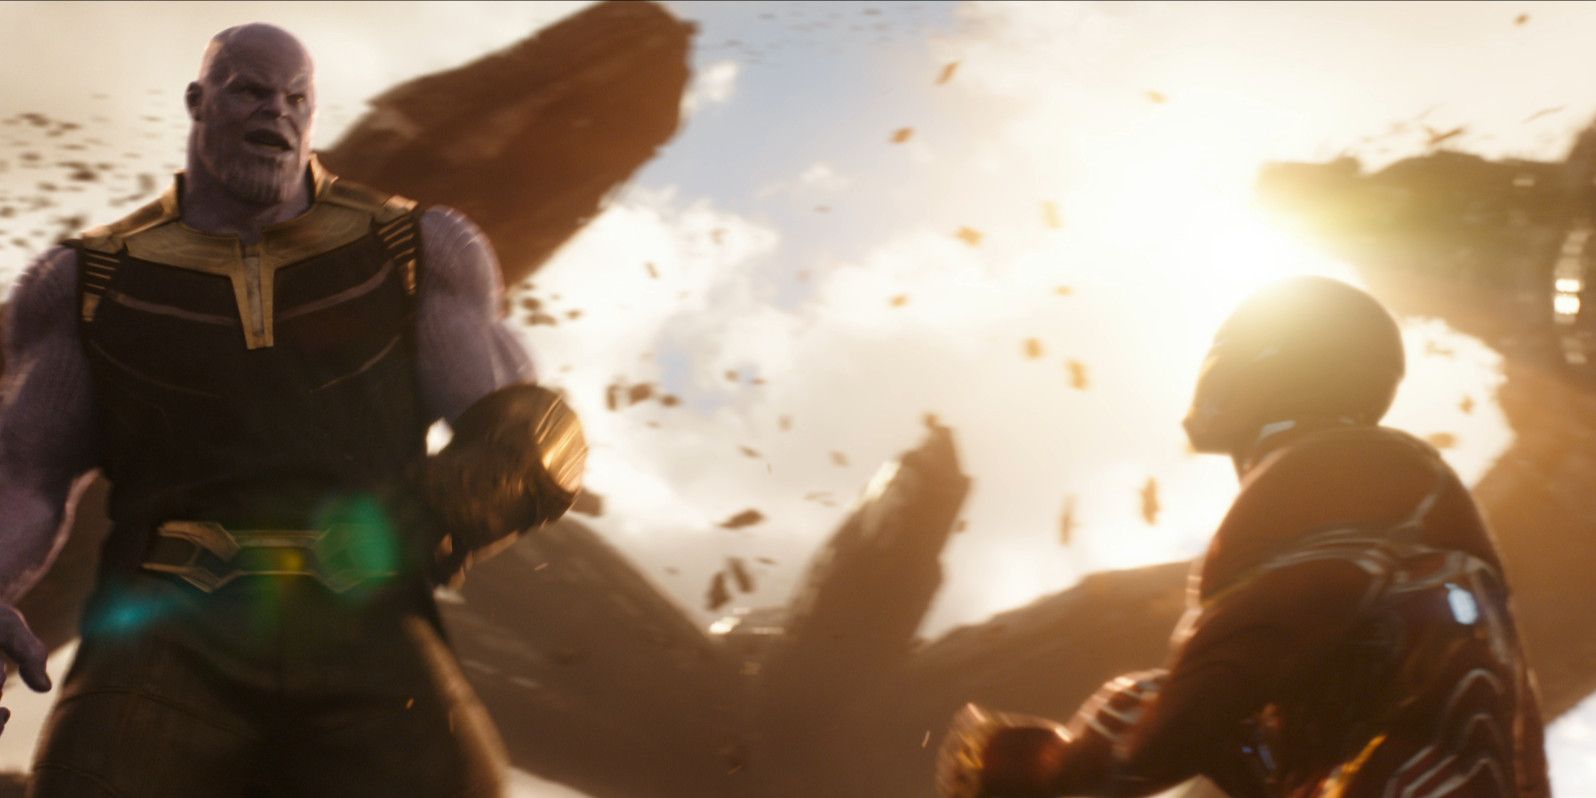 Thanos stands while Iron Man lays on the ground in Infinity War